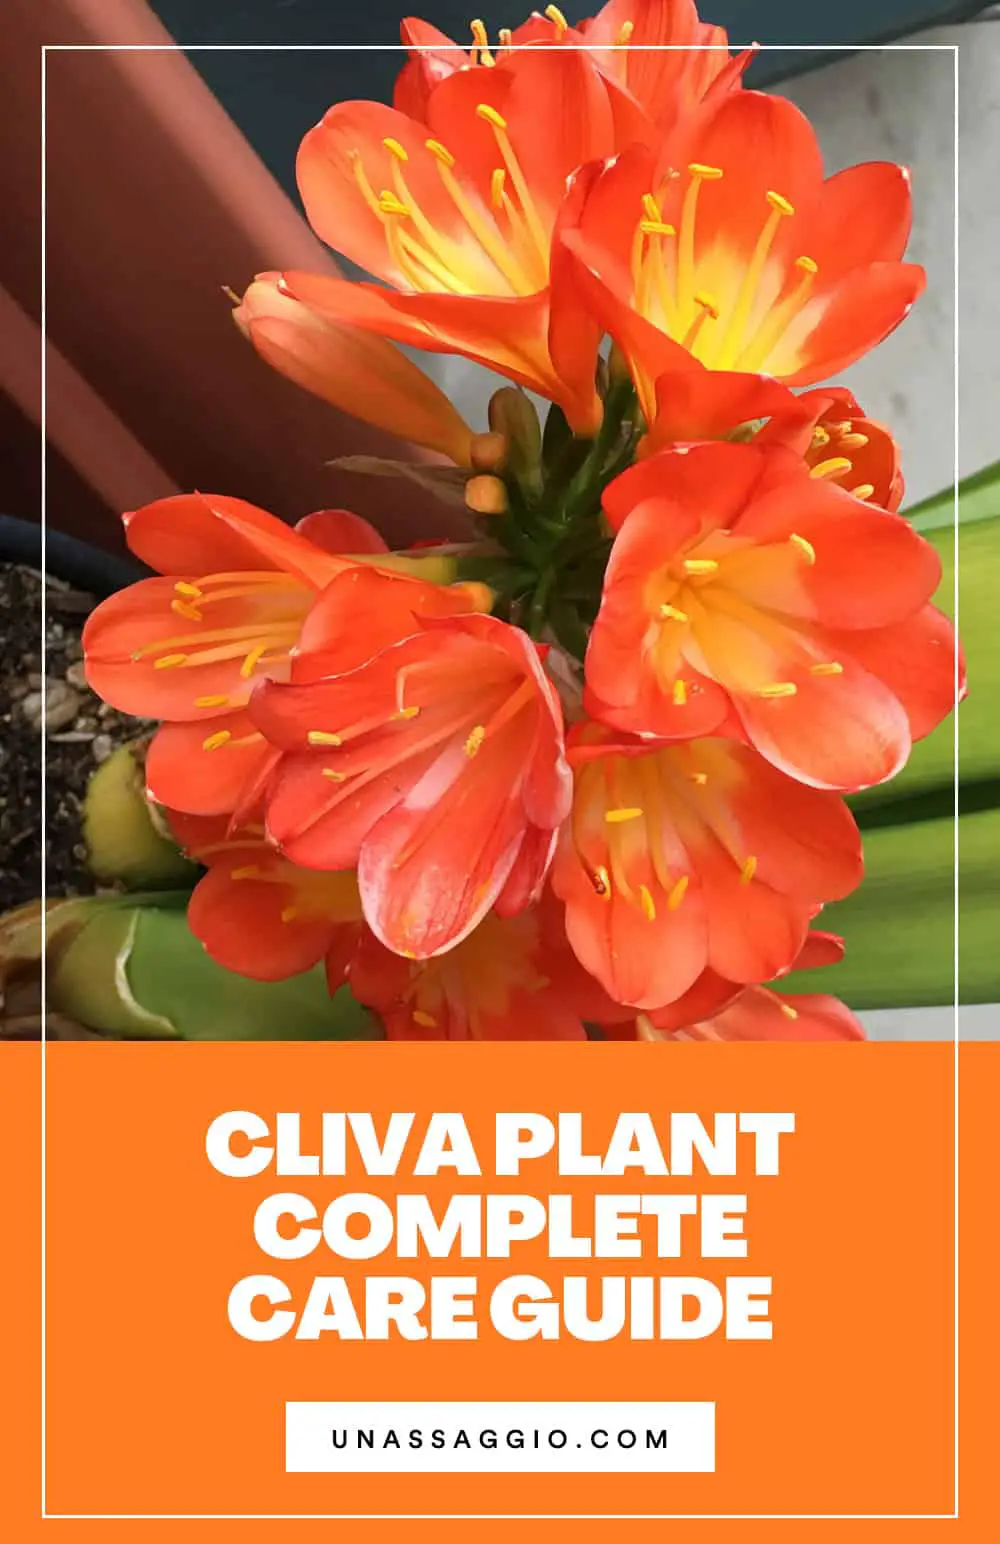 How to Take Care of a Clivia Plant